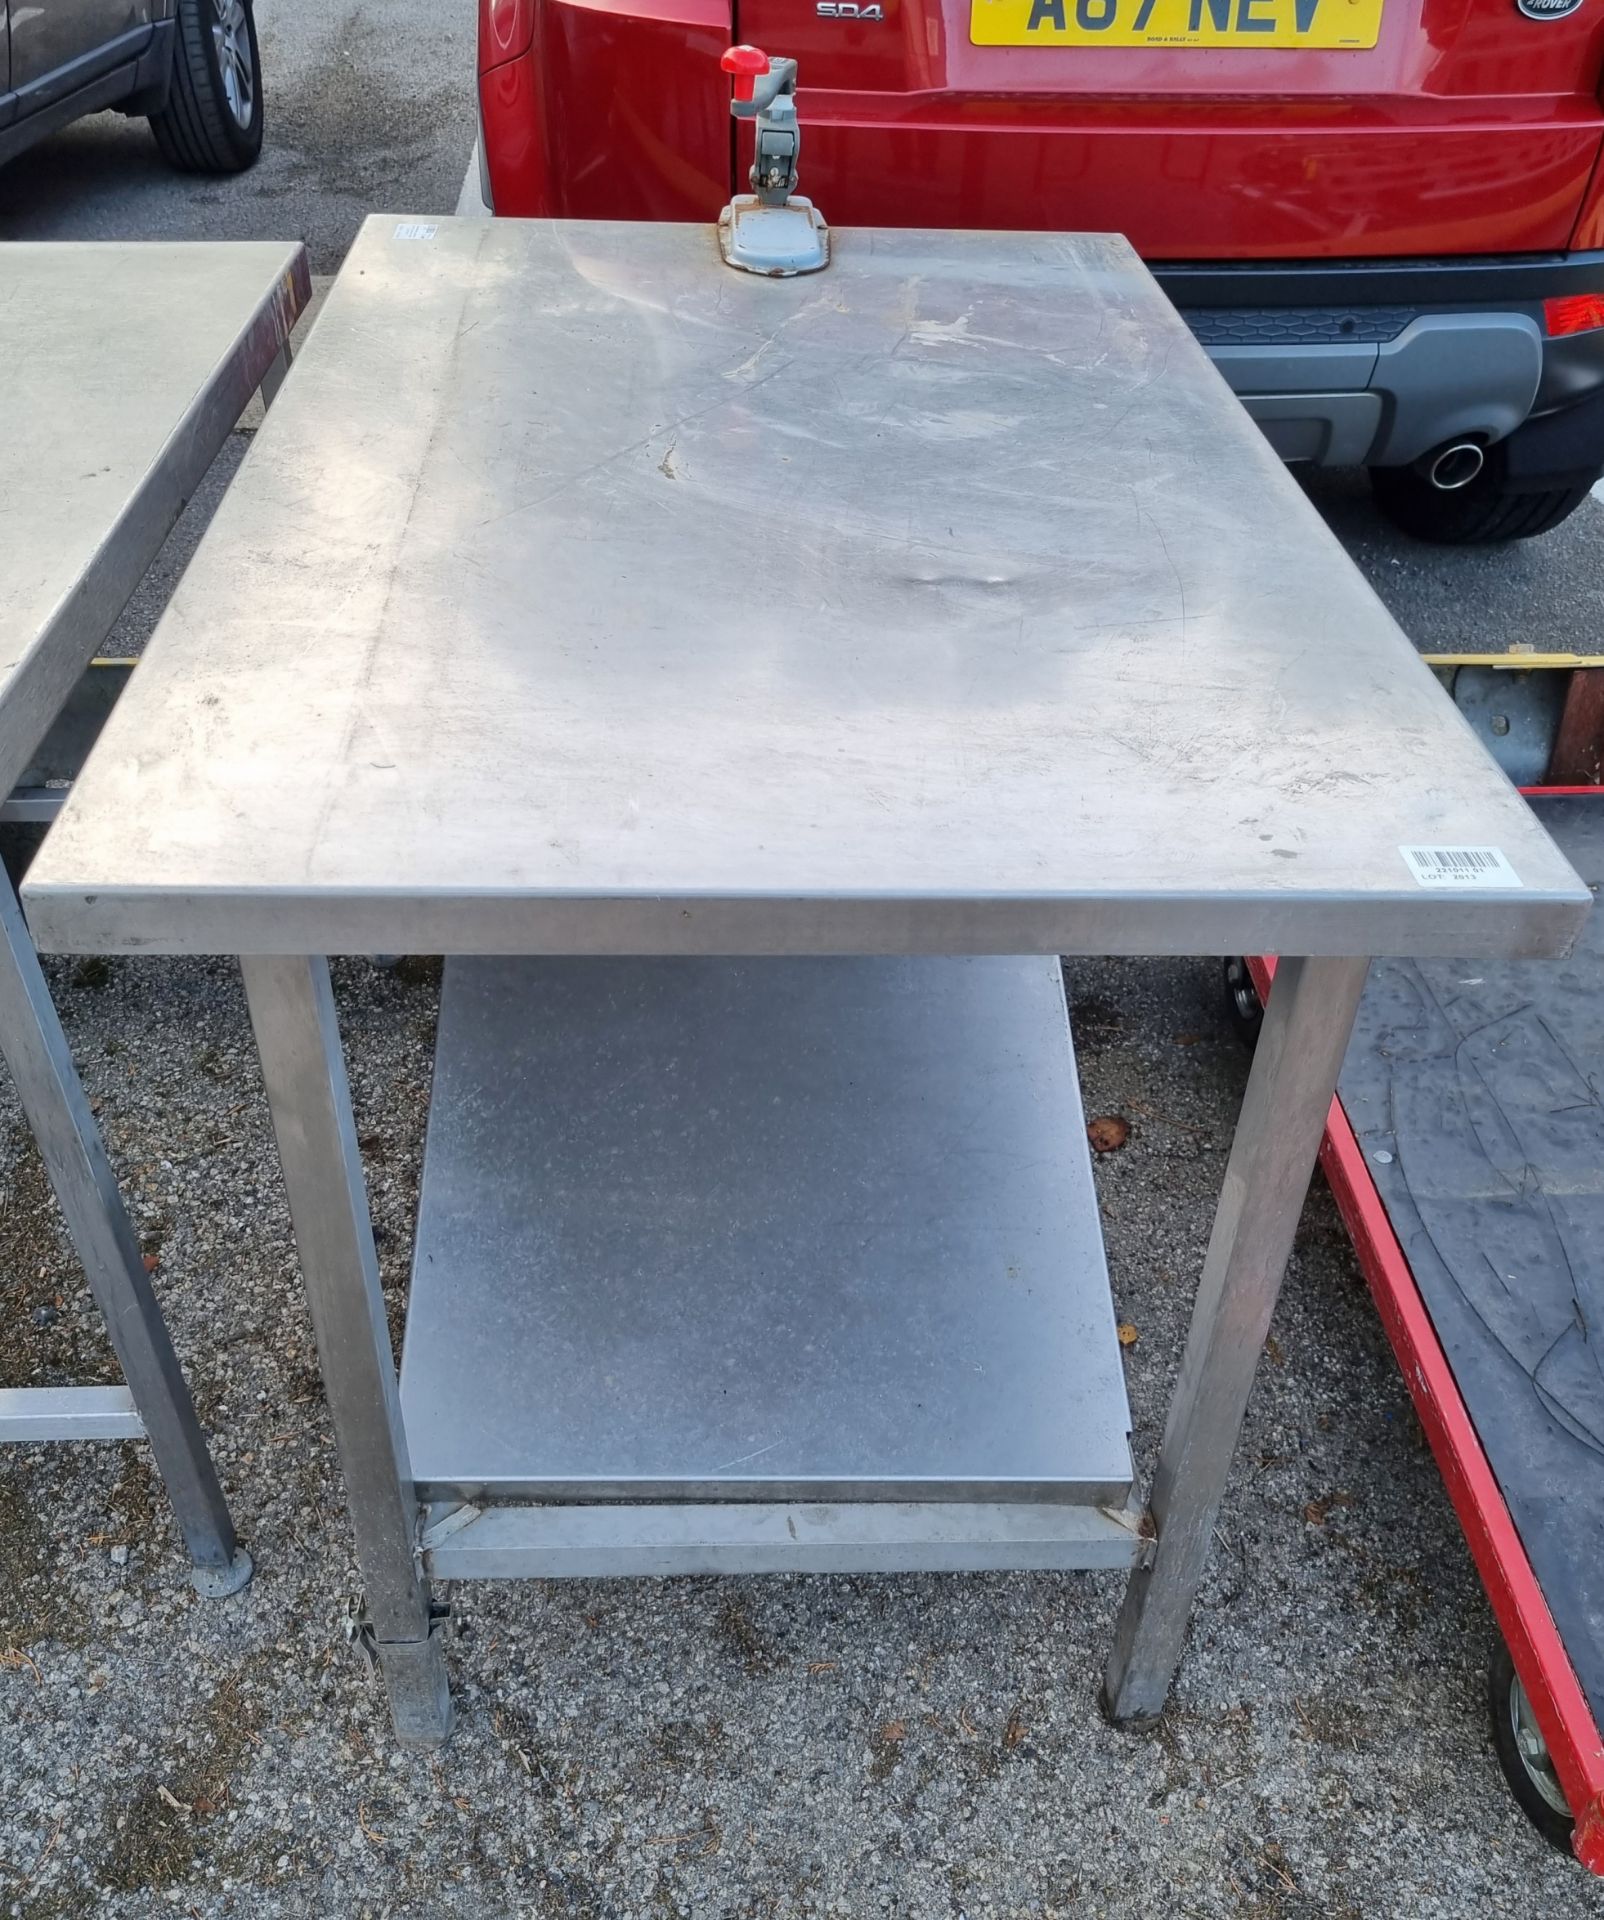 Stainless steel preparation table with drawer and shelf - 120x75x85cm